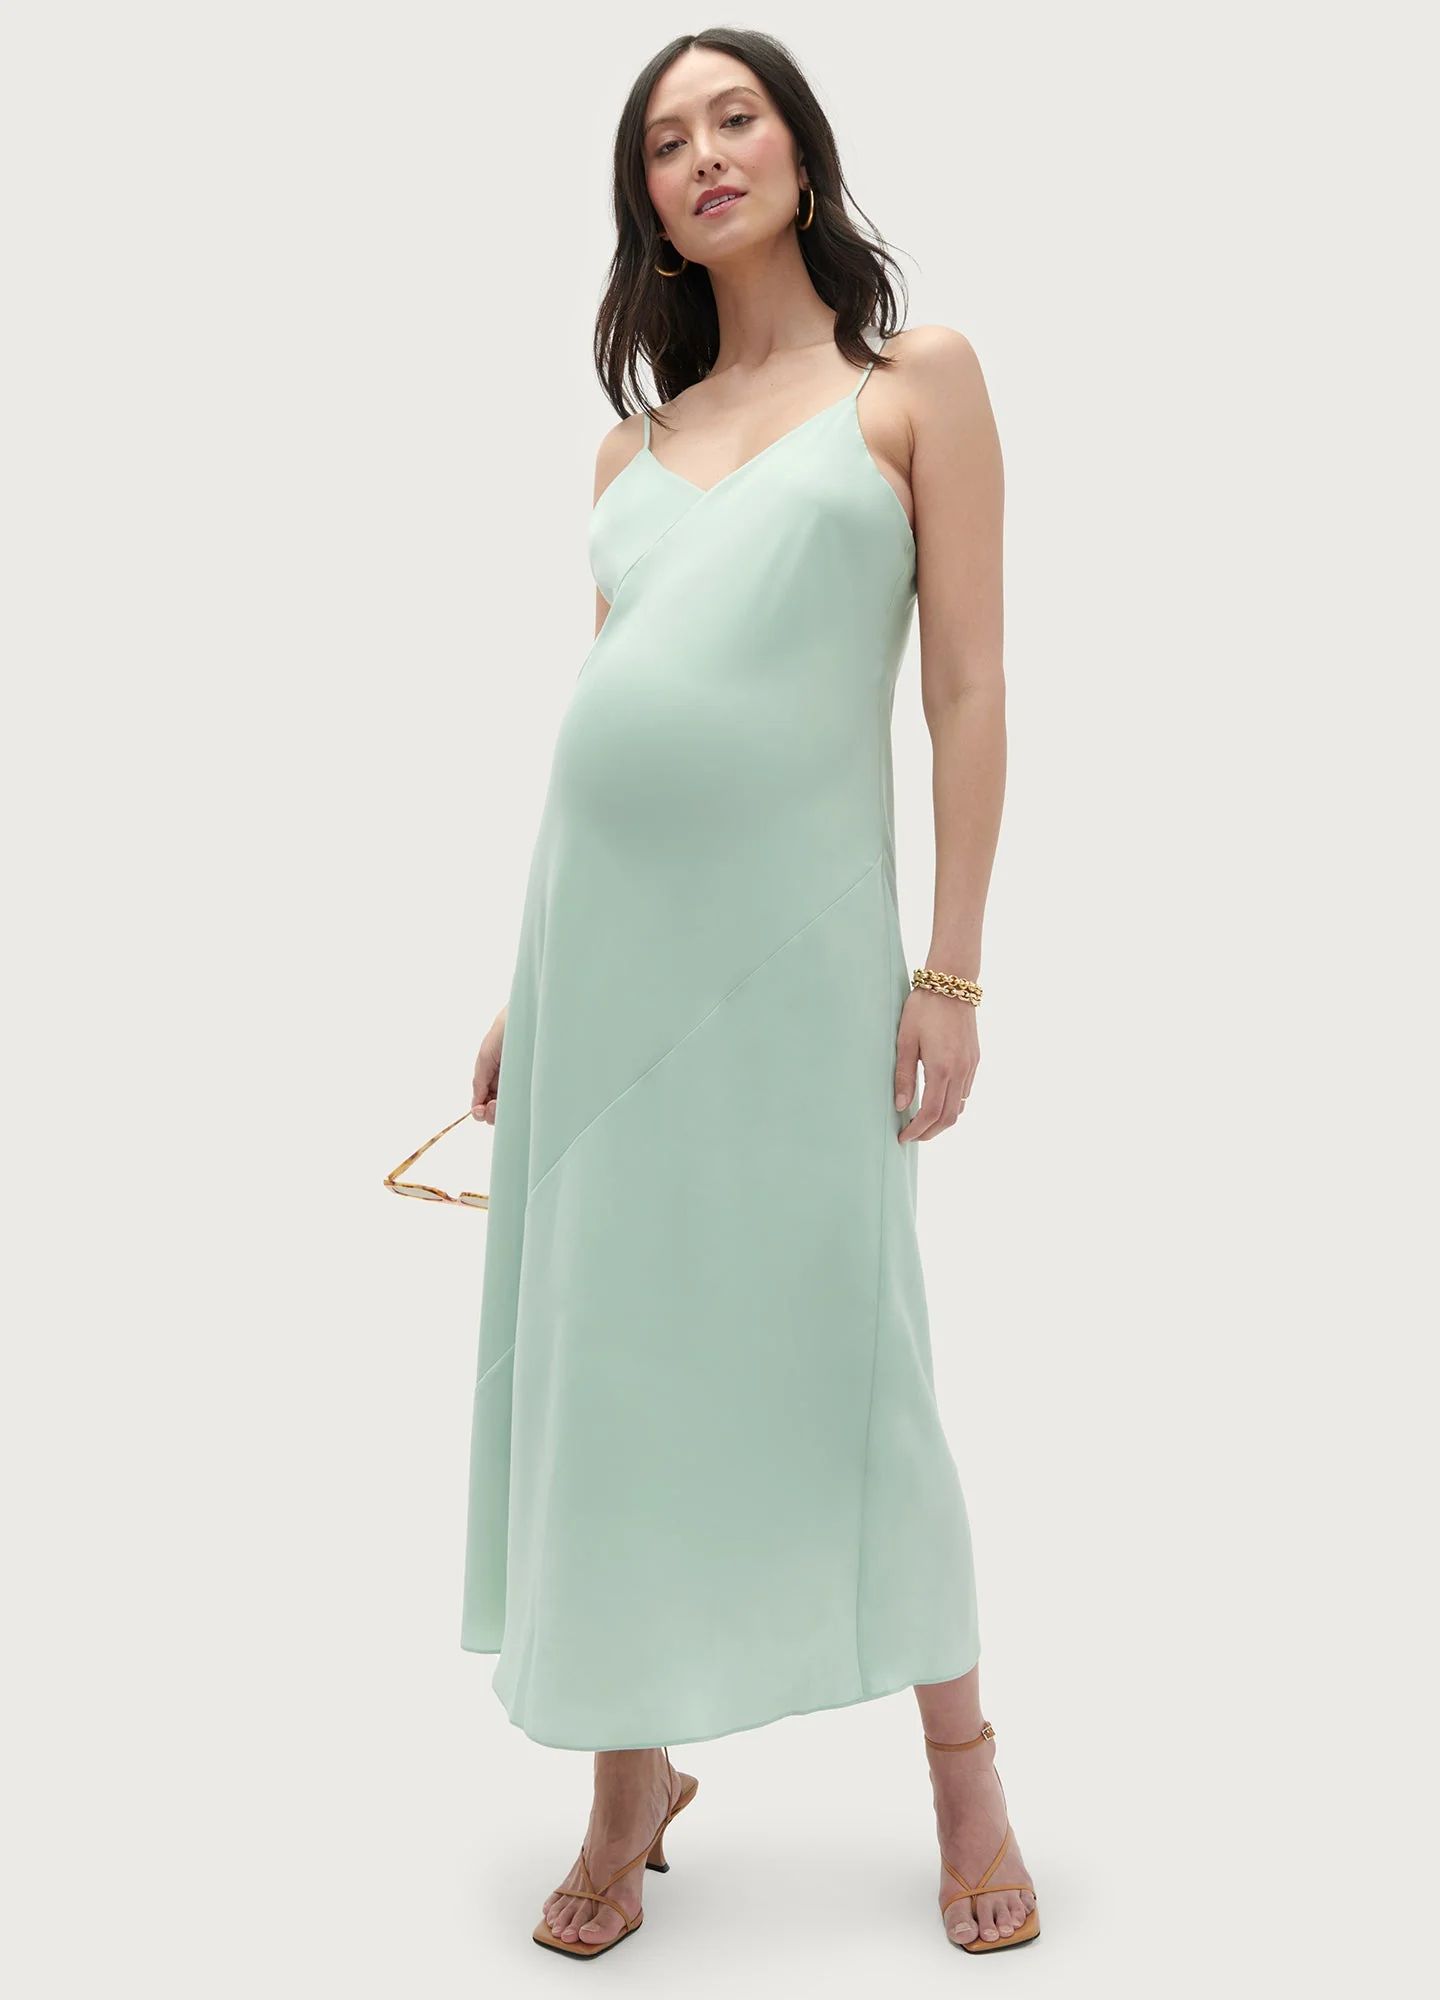 The Willow Dress | Hatch Collection